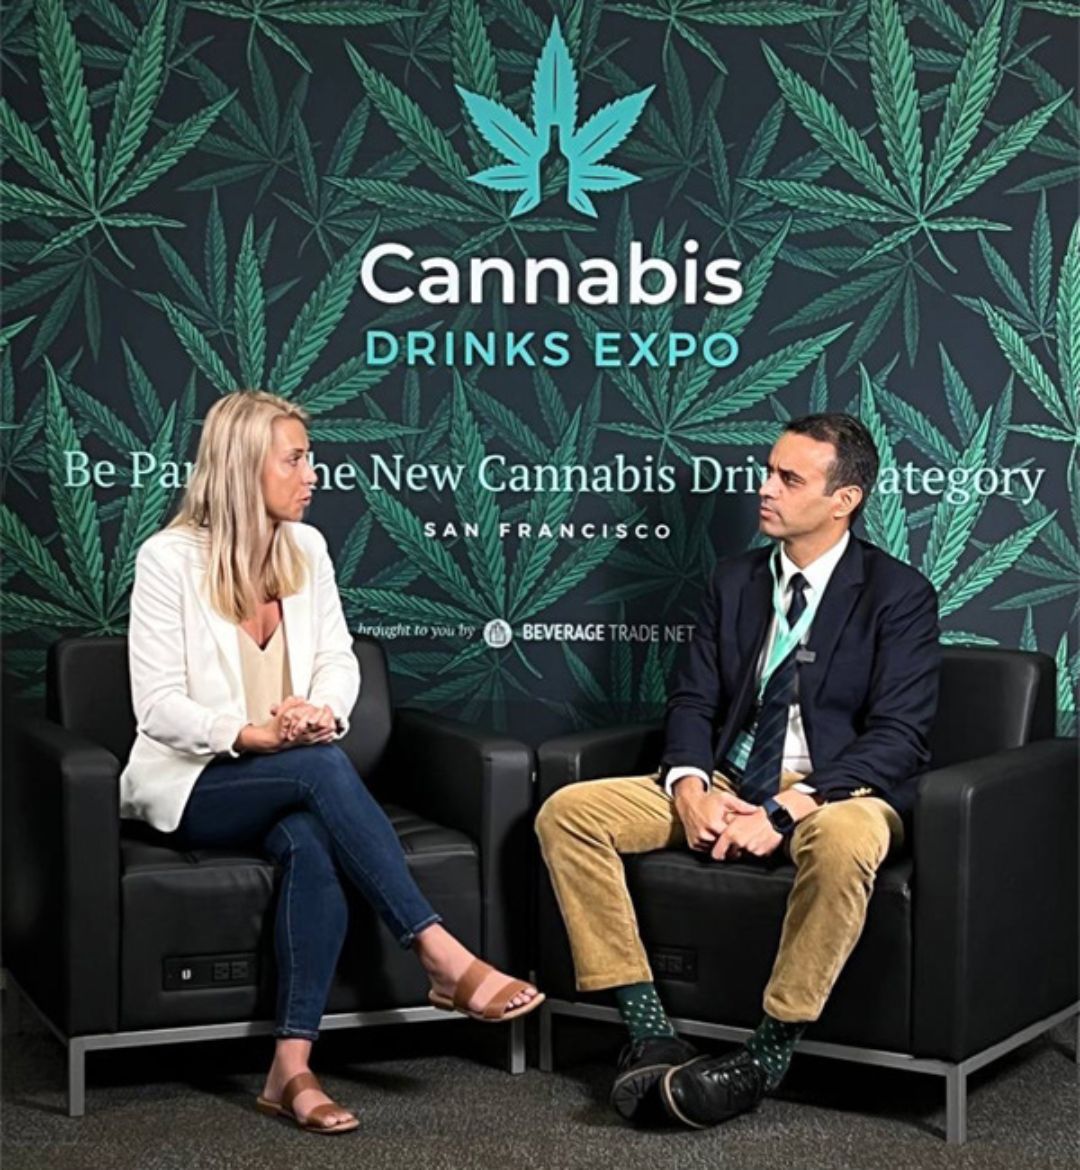 Sid Patel, CEO of Cannabis Drinks Expo and Beverage Trade Network, is in a conversation with Kimberly Stolz, Head of Market Development at Keef Brands